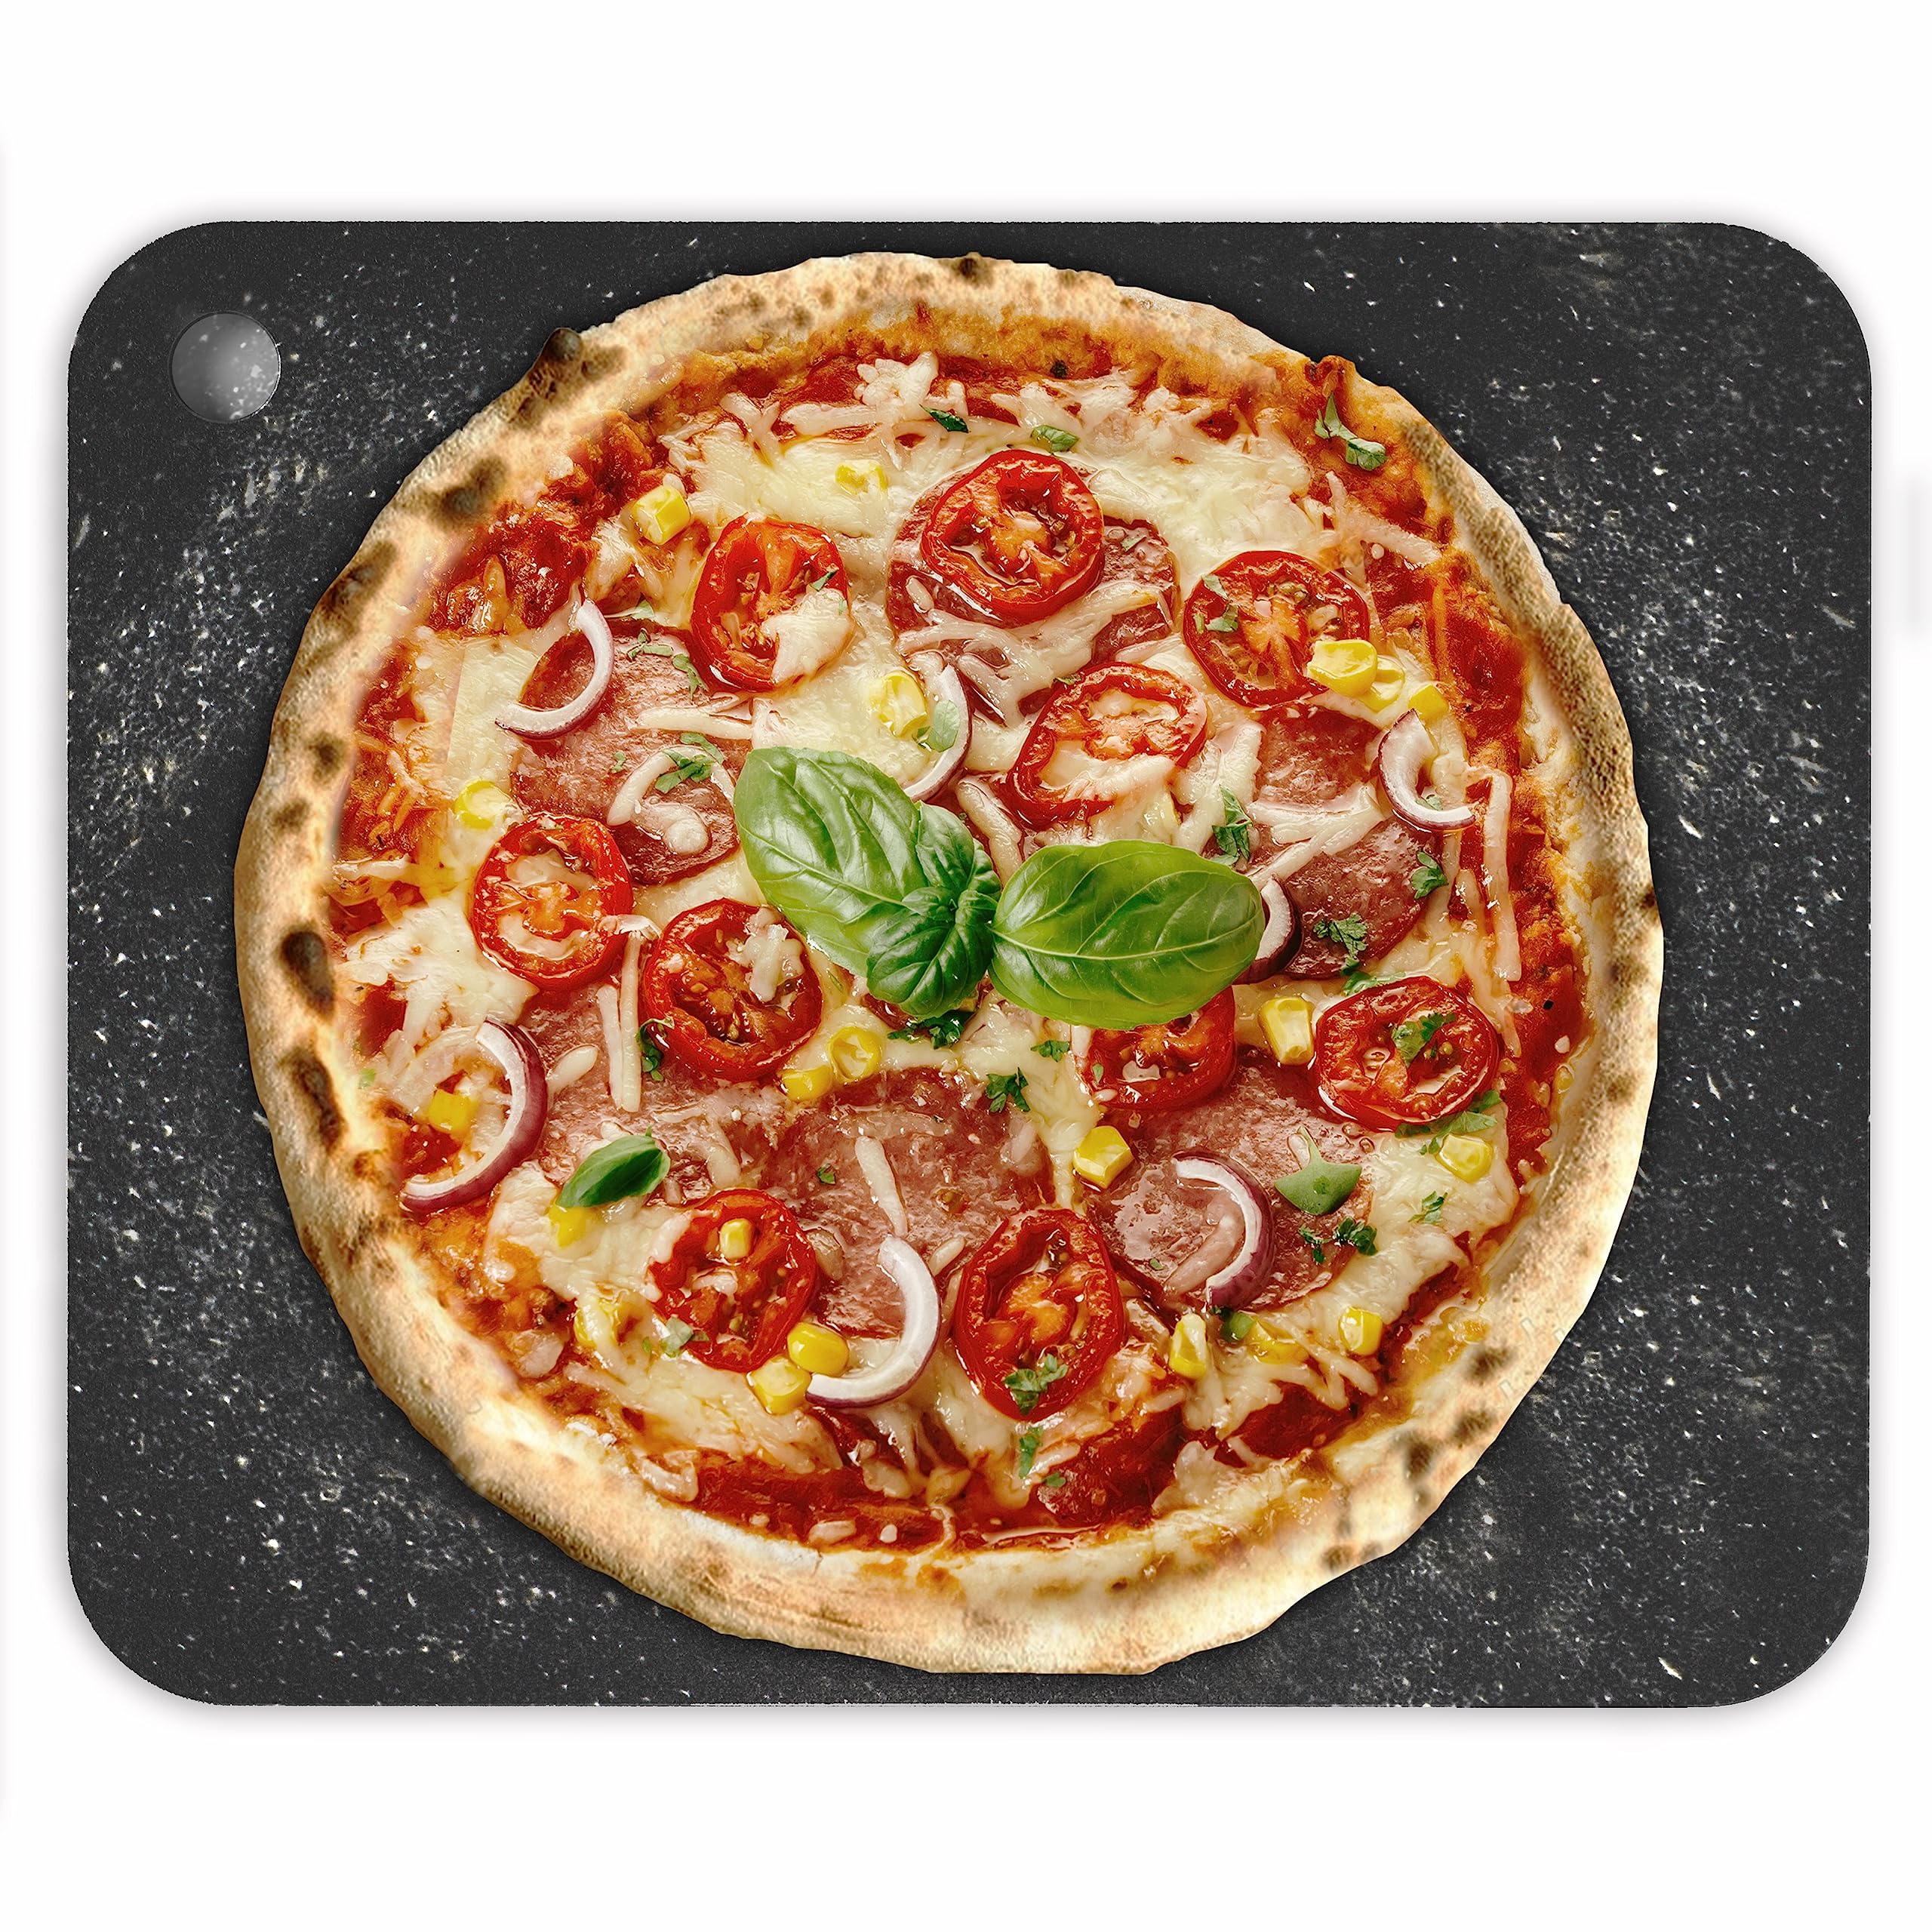 Chef Pomodoro Pizza Steel for Oven, 16 x 13.5 x 0.25 Thick, Baking Steel for Oven, Baking Steel Pizza Stone